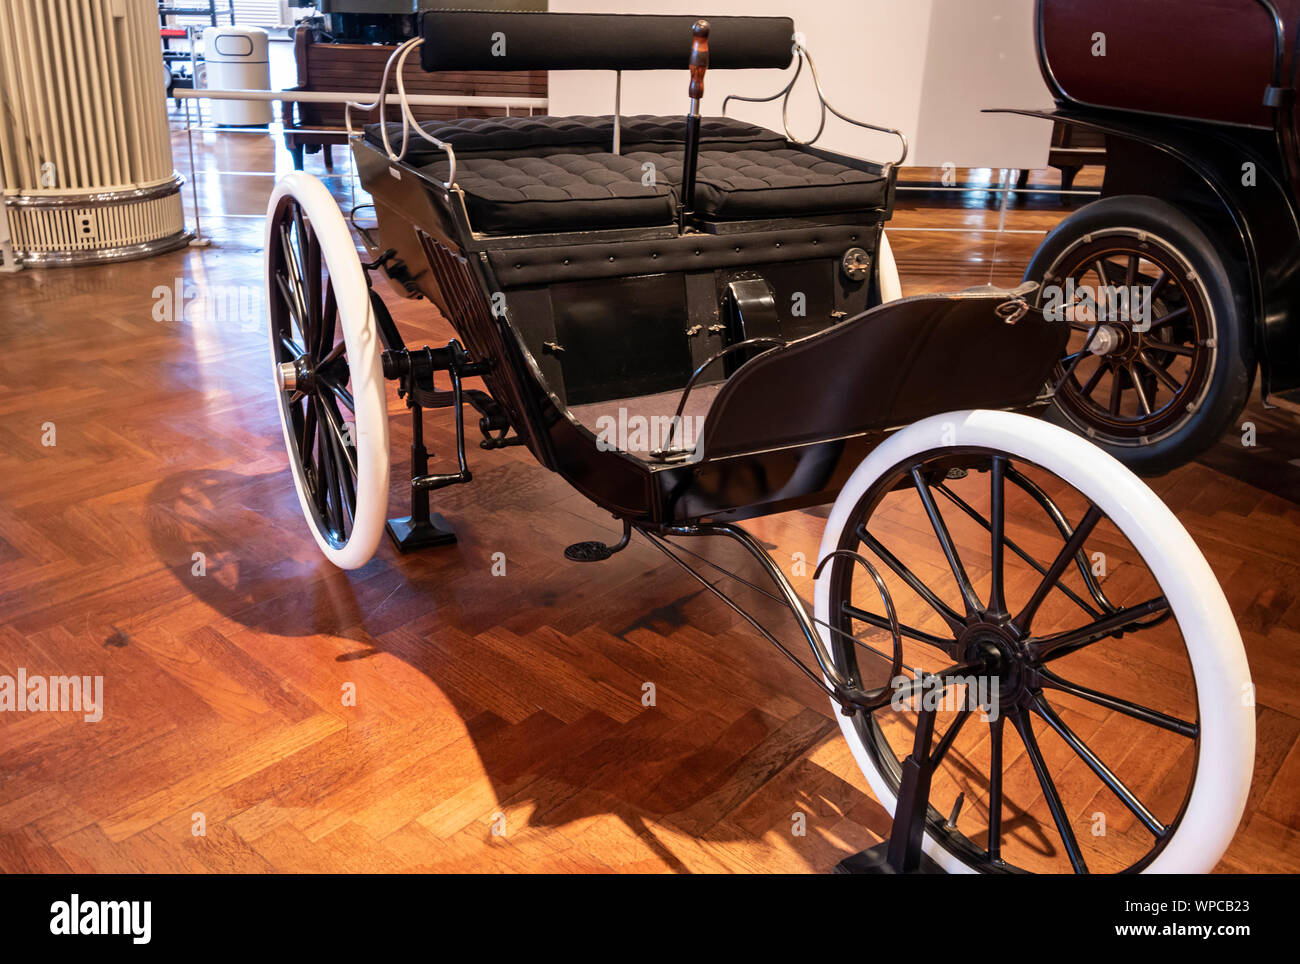 Dearborn, Mi, Usa - March 2019: The 1899 Duryea trap presented in the Henry Ford Museum of American Innovation. Stock Photo